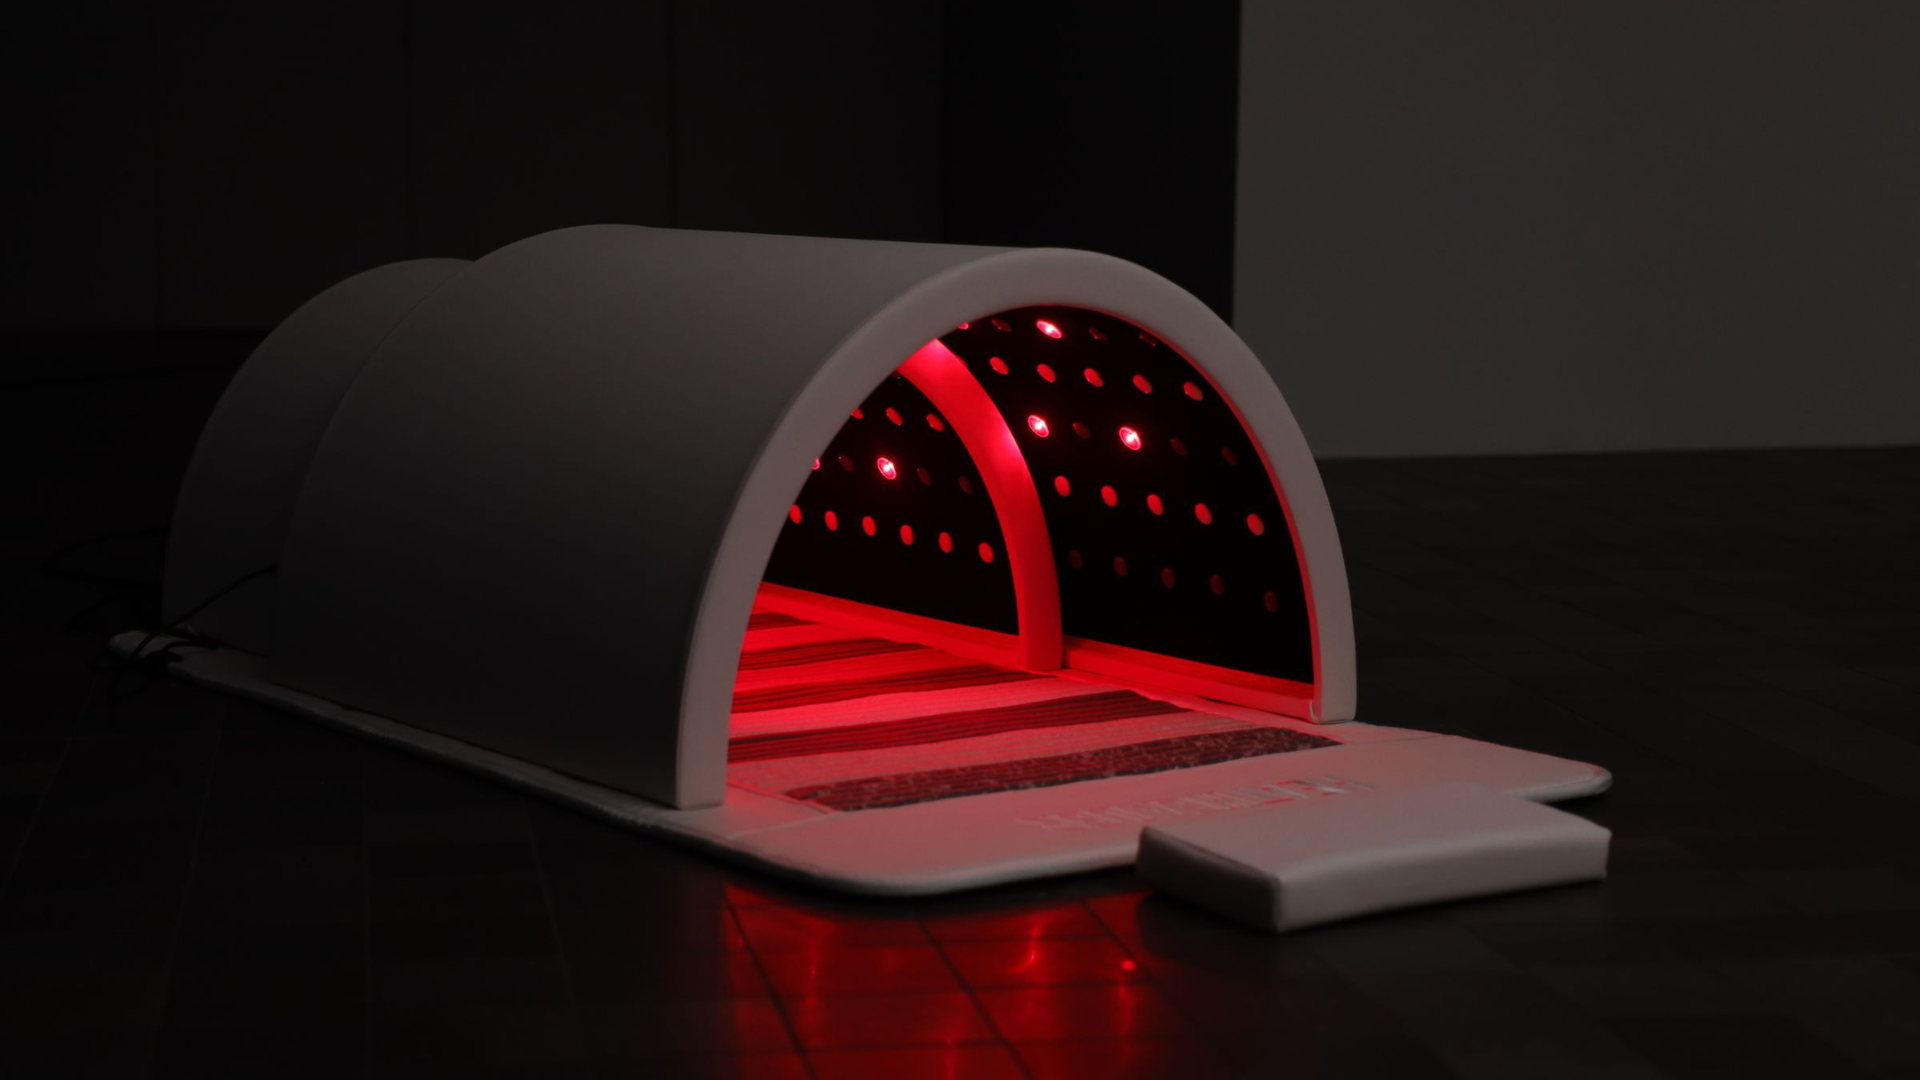 The Energy Sauna and The Organic Sci-Fi’ Interior Trend